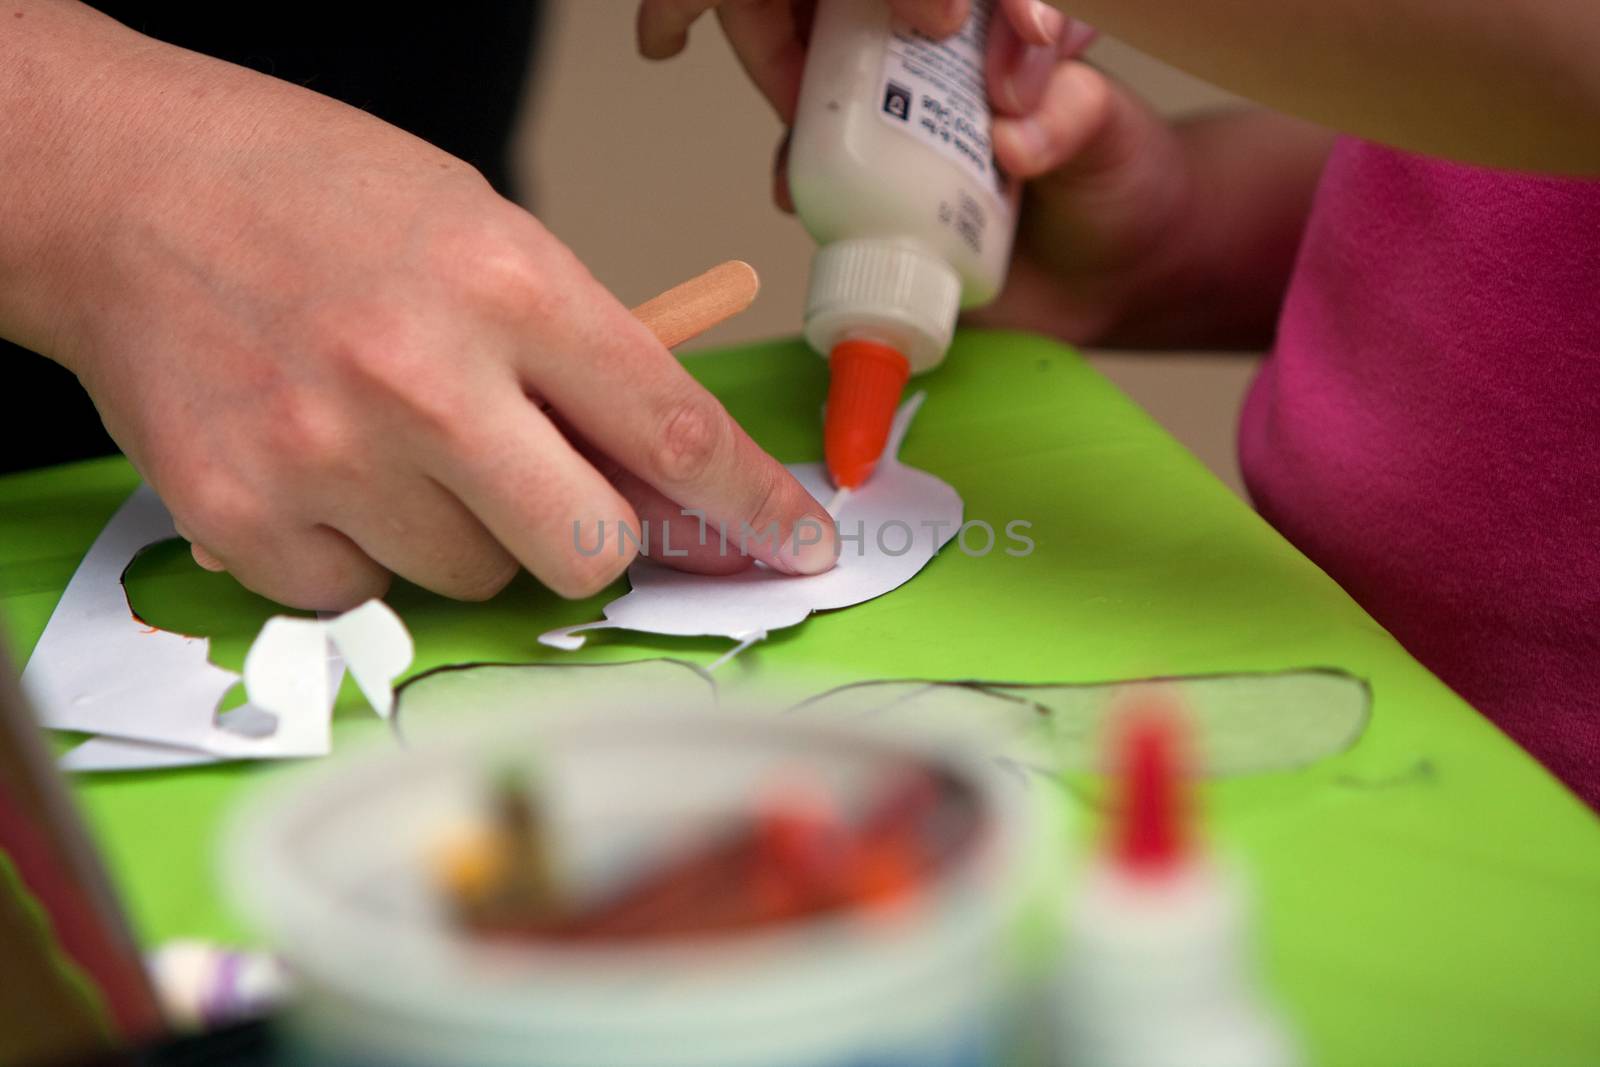 Mother's Hand Helps Child Glue Art Project At Summer Festival by BluIz60